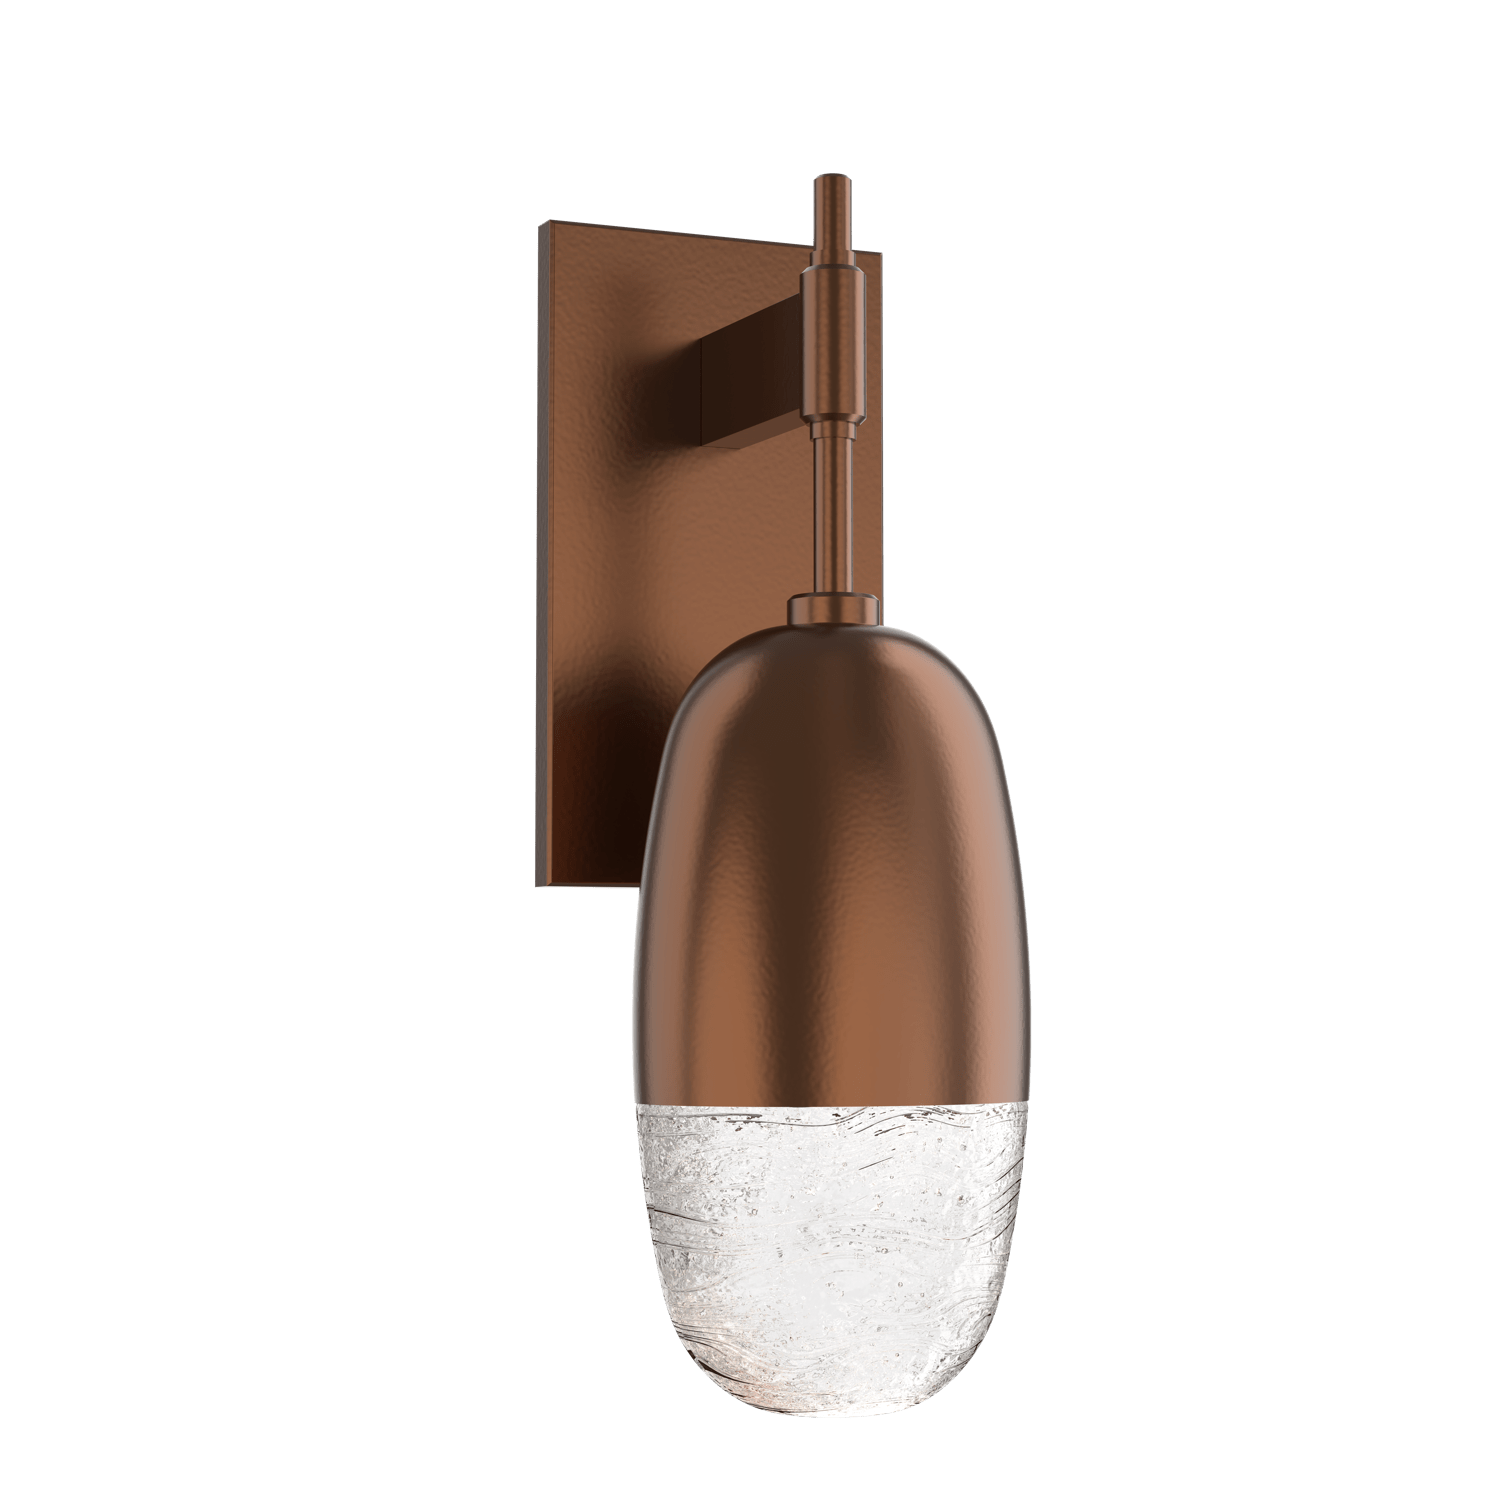 IDB0079-01-BB-Hammerton-Studio-Pebble-wall-sconce-with-burnished-bronze-finish-and-clear-cast-glass-shades-and-LED-lamping